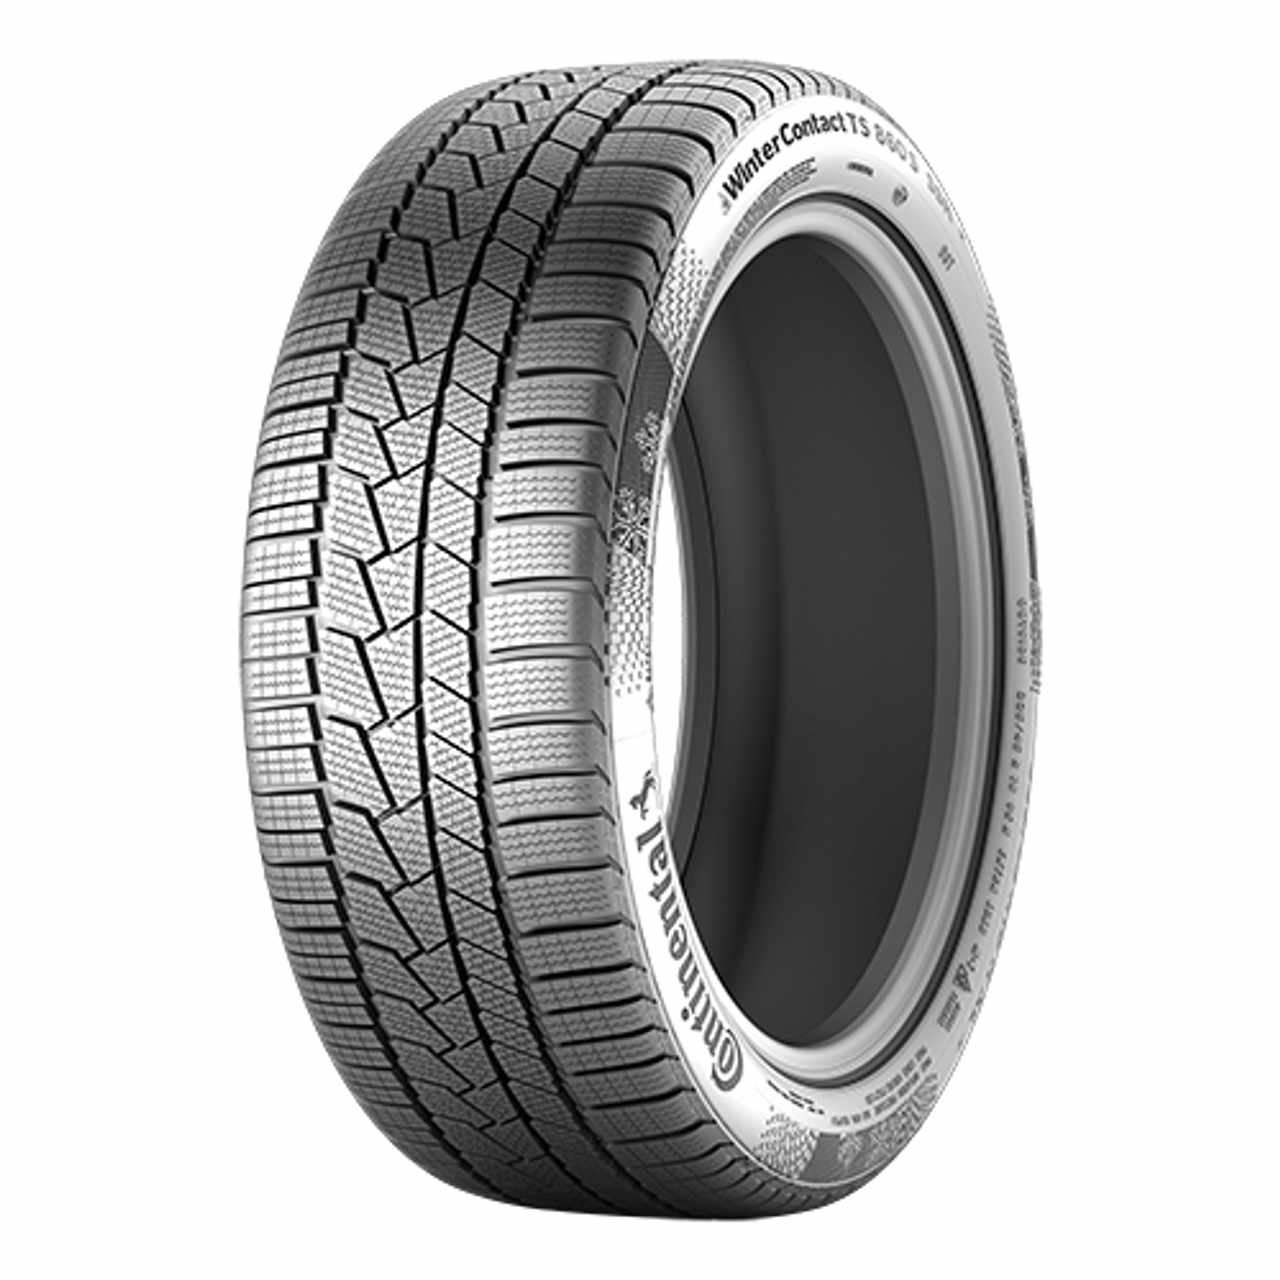 CONTINENTAL WINTERCONTACT TS 860 S (*) (EVc) SSR 205/60R16 96H BSW XL